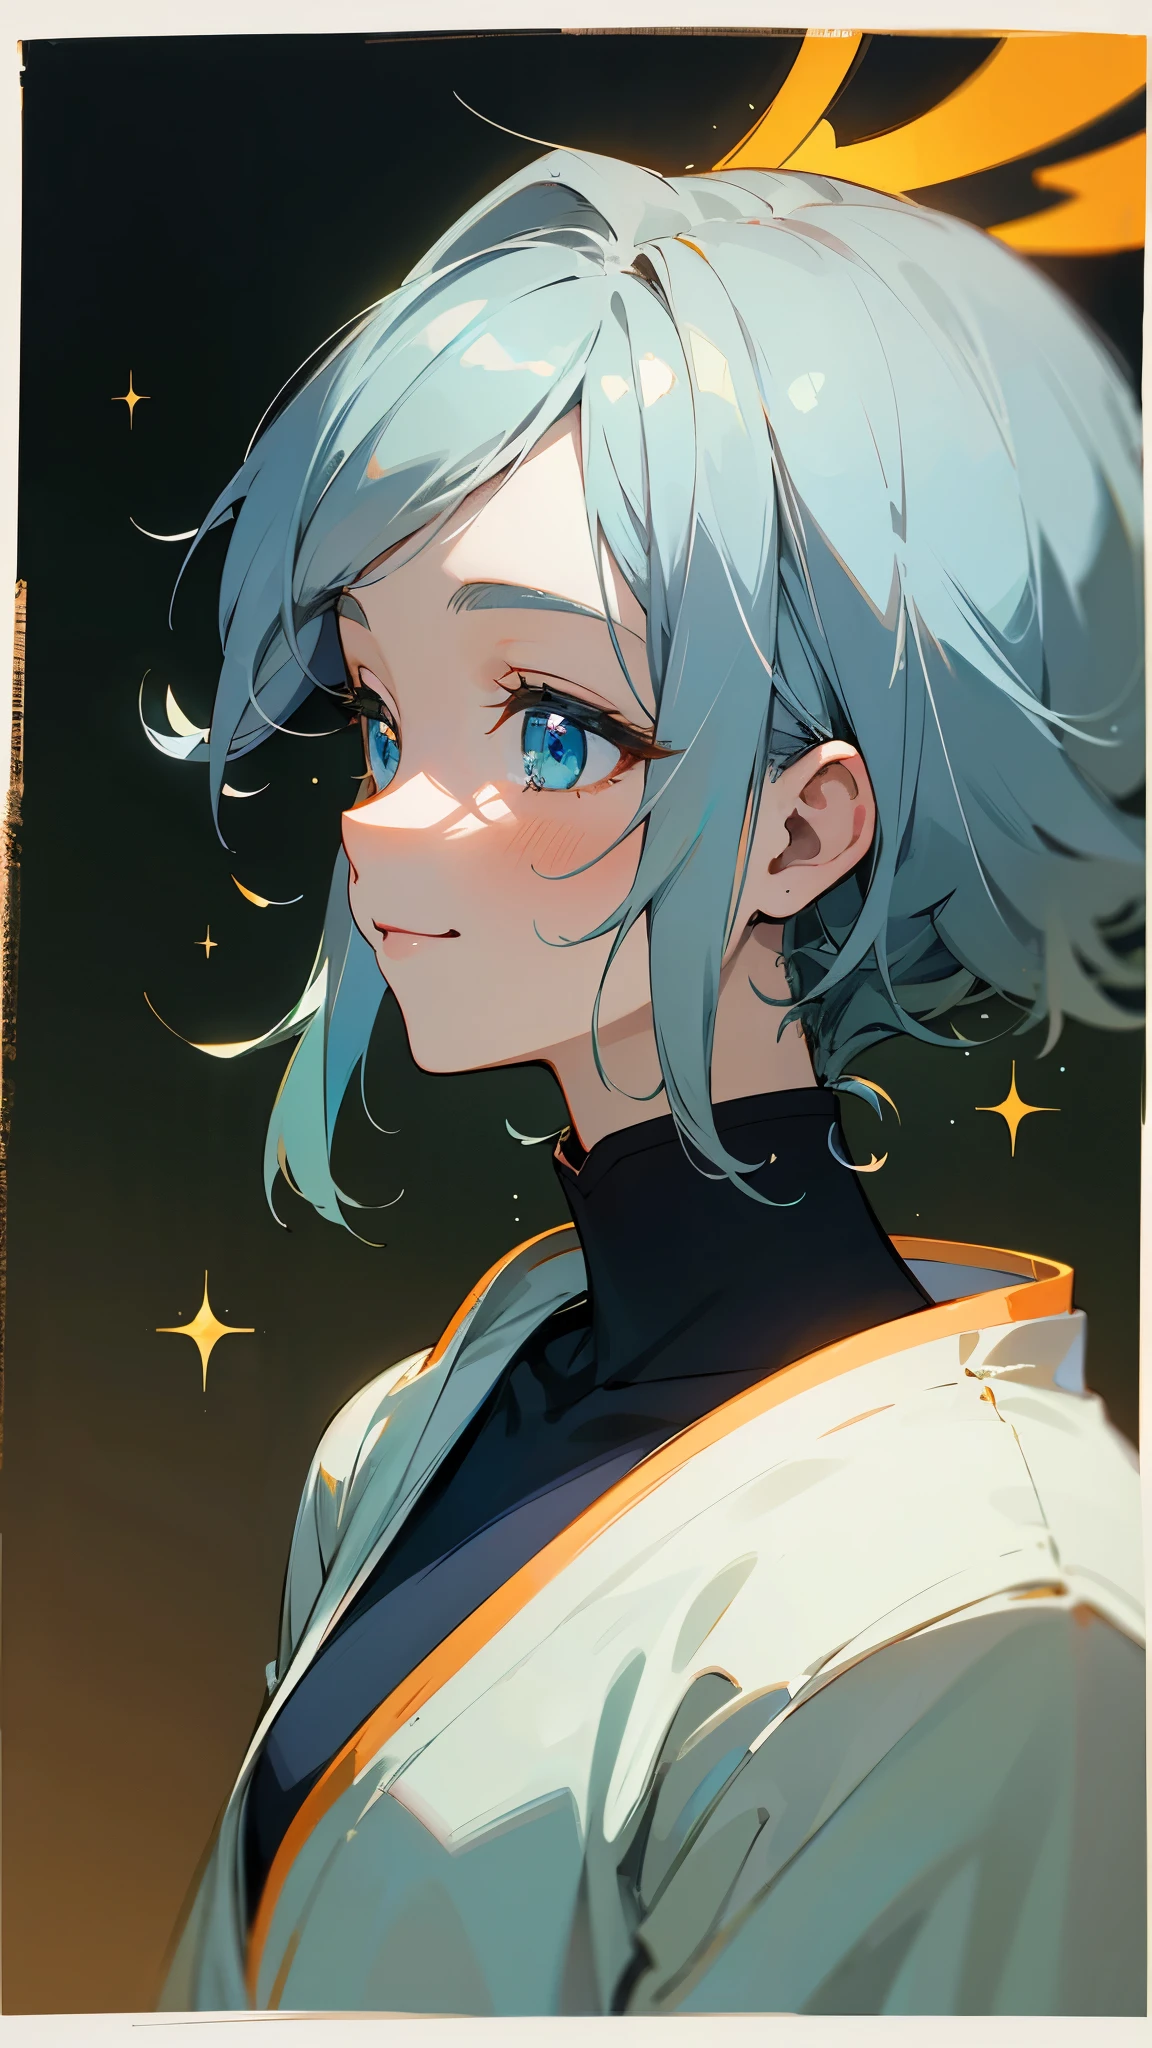 16-year-old girl、Anime style painting、Upper body close-up、smile、From the side, impression, (Oil), Green and orange tones、Silver Hair, (Sparkling blue eyes)、Eat rice balls、Delicate contours、Background Blur, Depth of the drawn border
